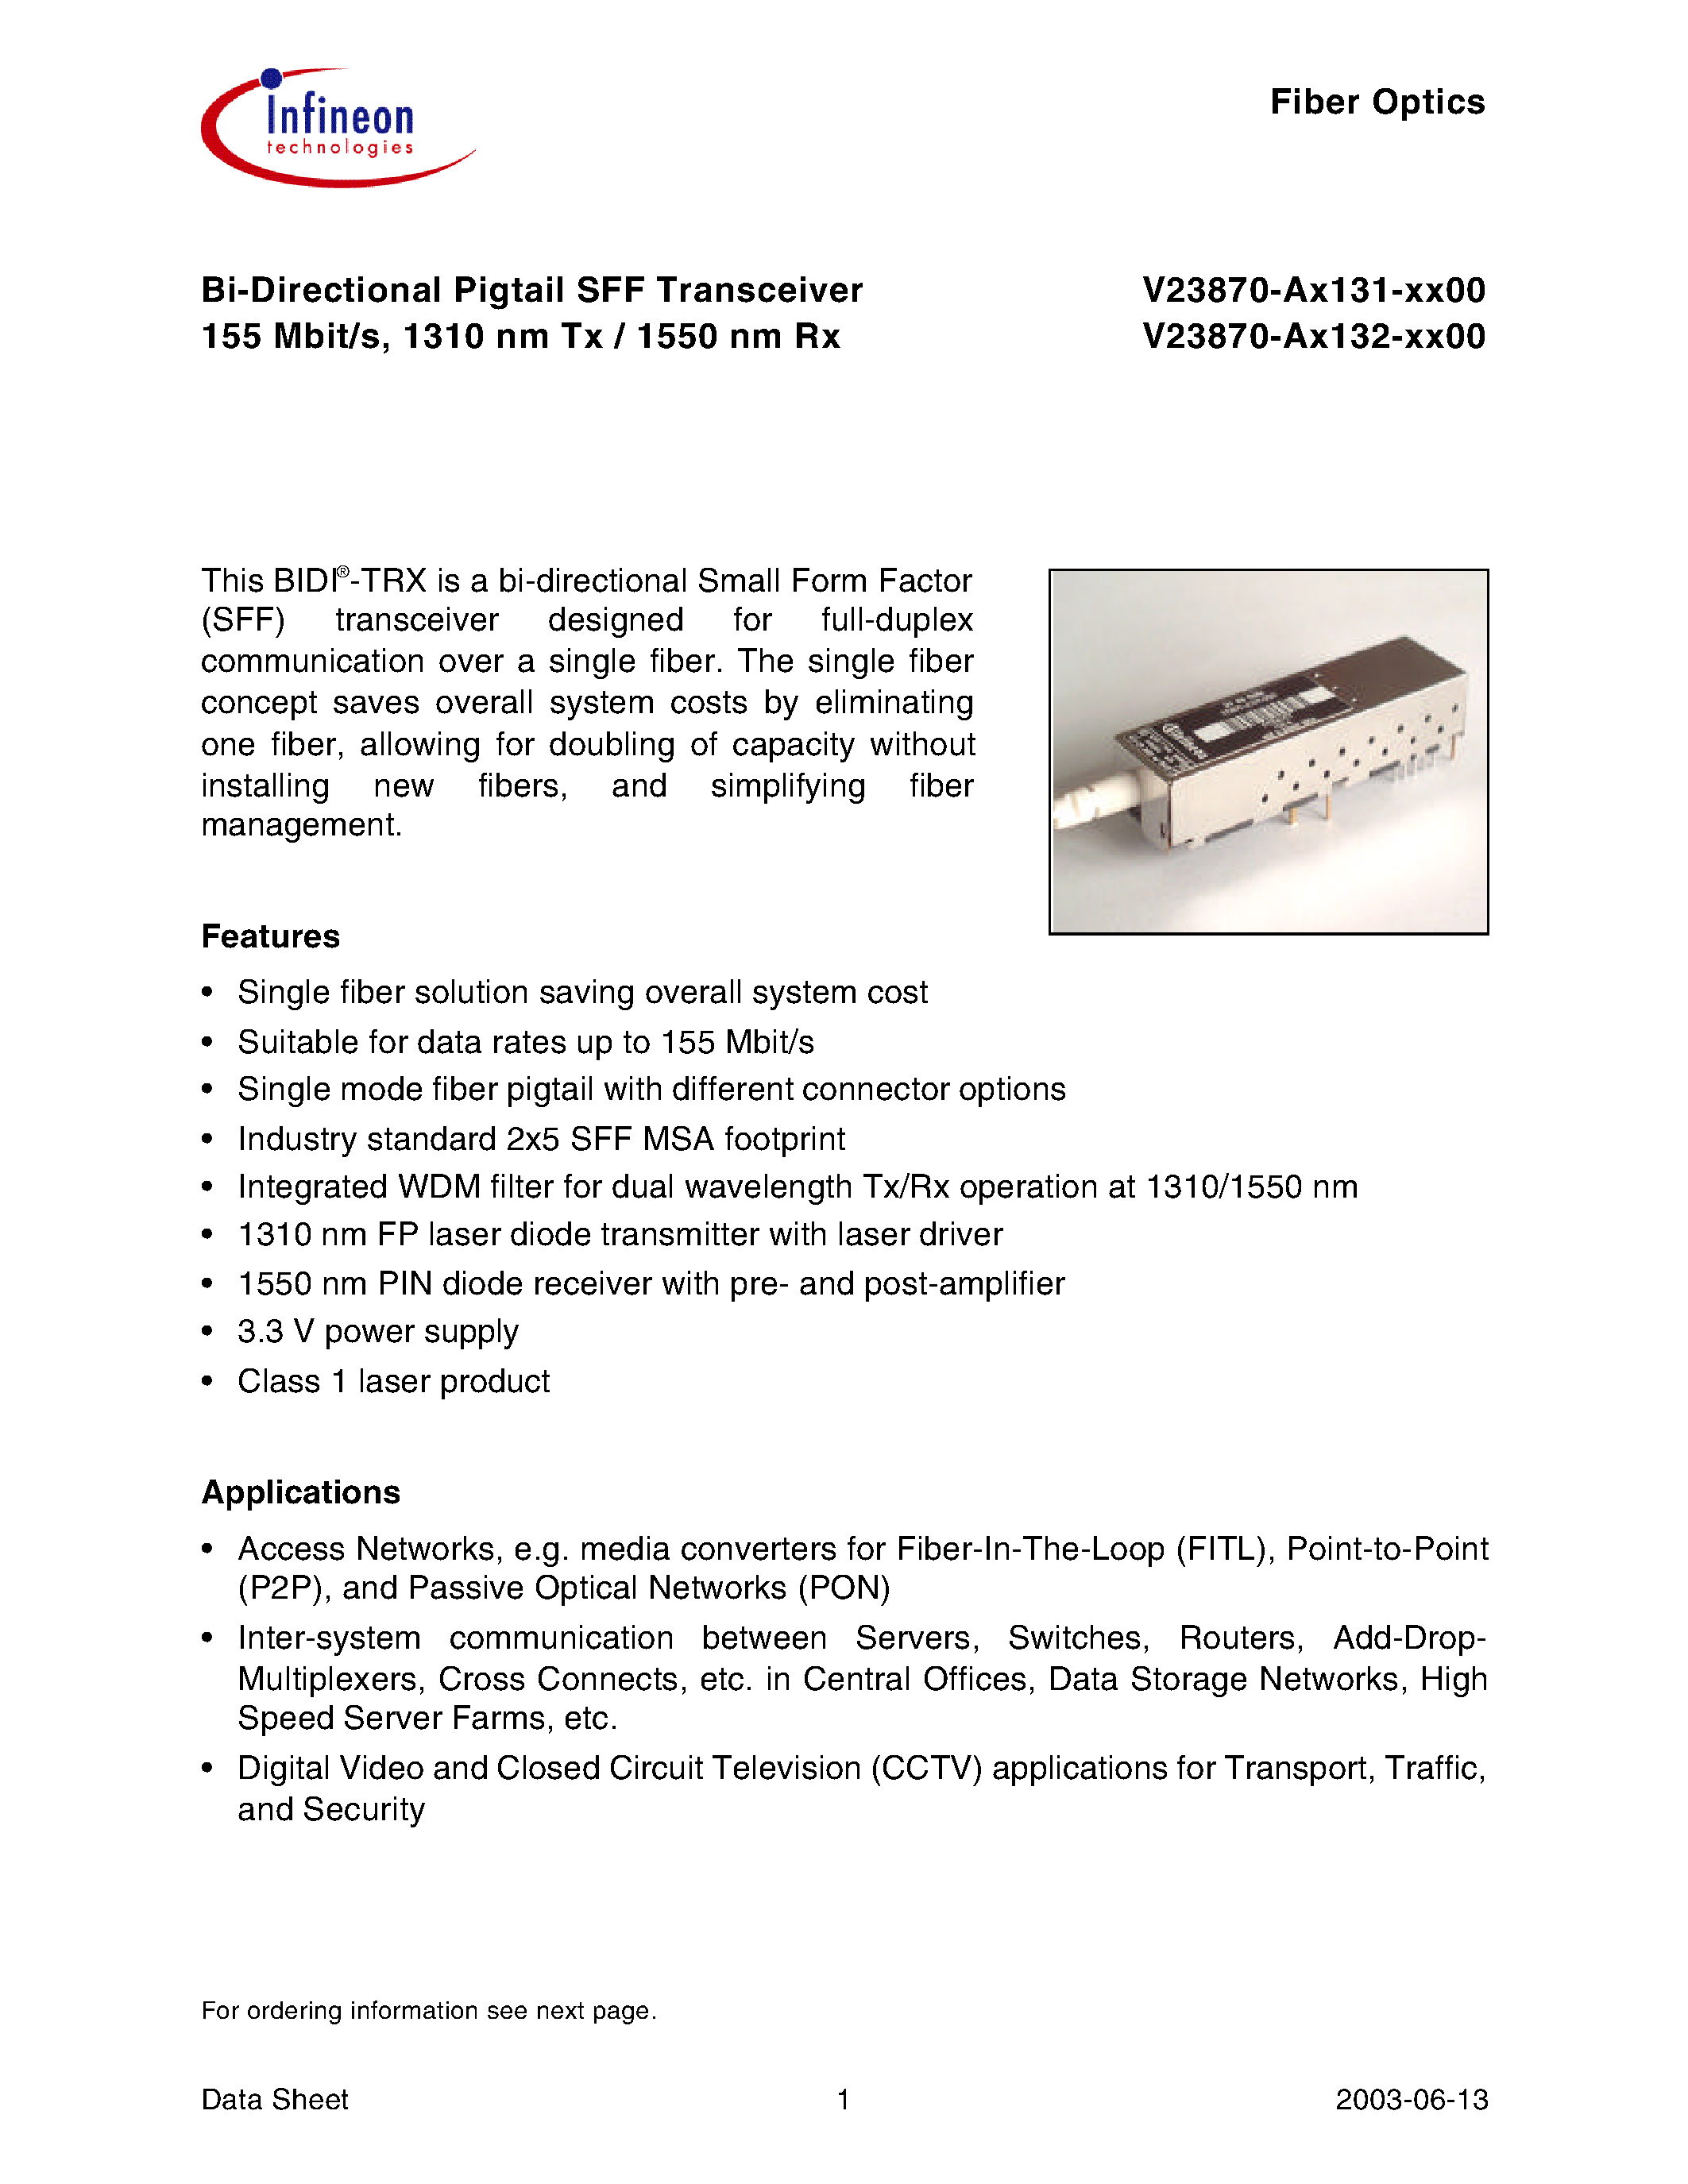 Datasheet V23870-A3132-K200 - Bi-Directional Pigtail SFF Transceiver 155 Mbit/s/ 1310 nm Tx / 1550 nm Rx page 1